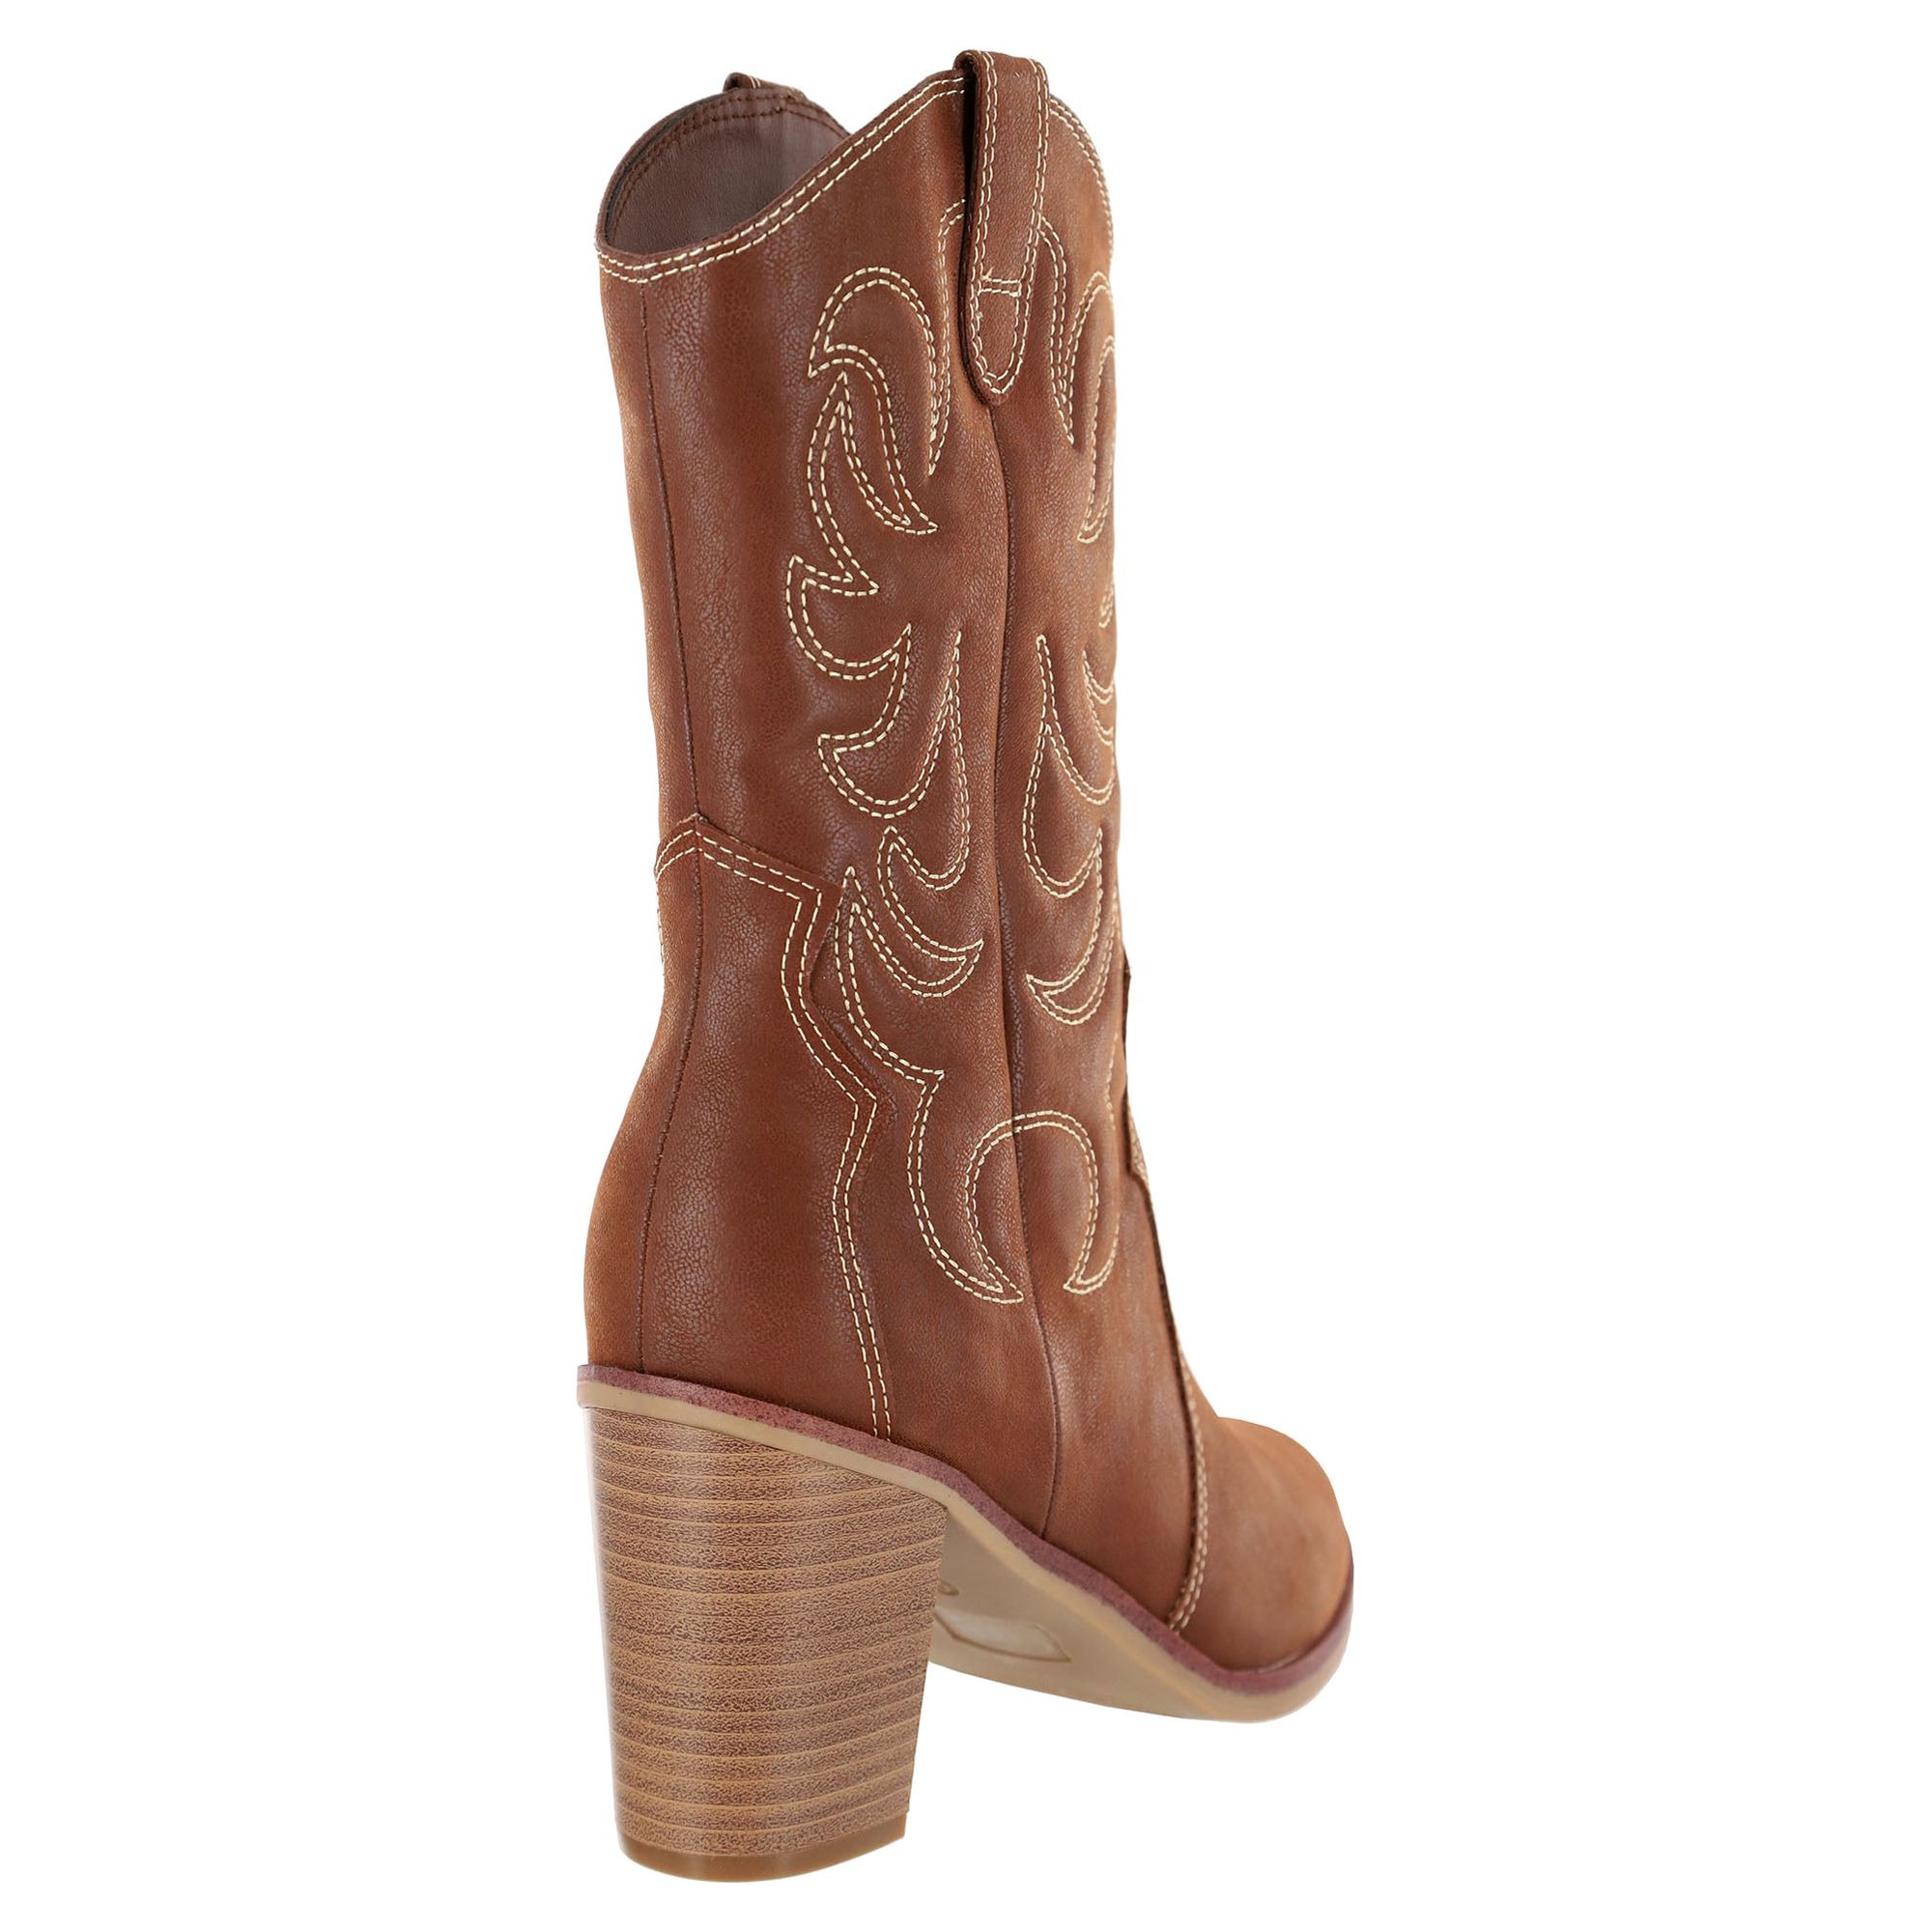 The Pioneer Woman Embroidered Mid-Calf Western Boots, Women's - image 5 of 6